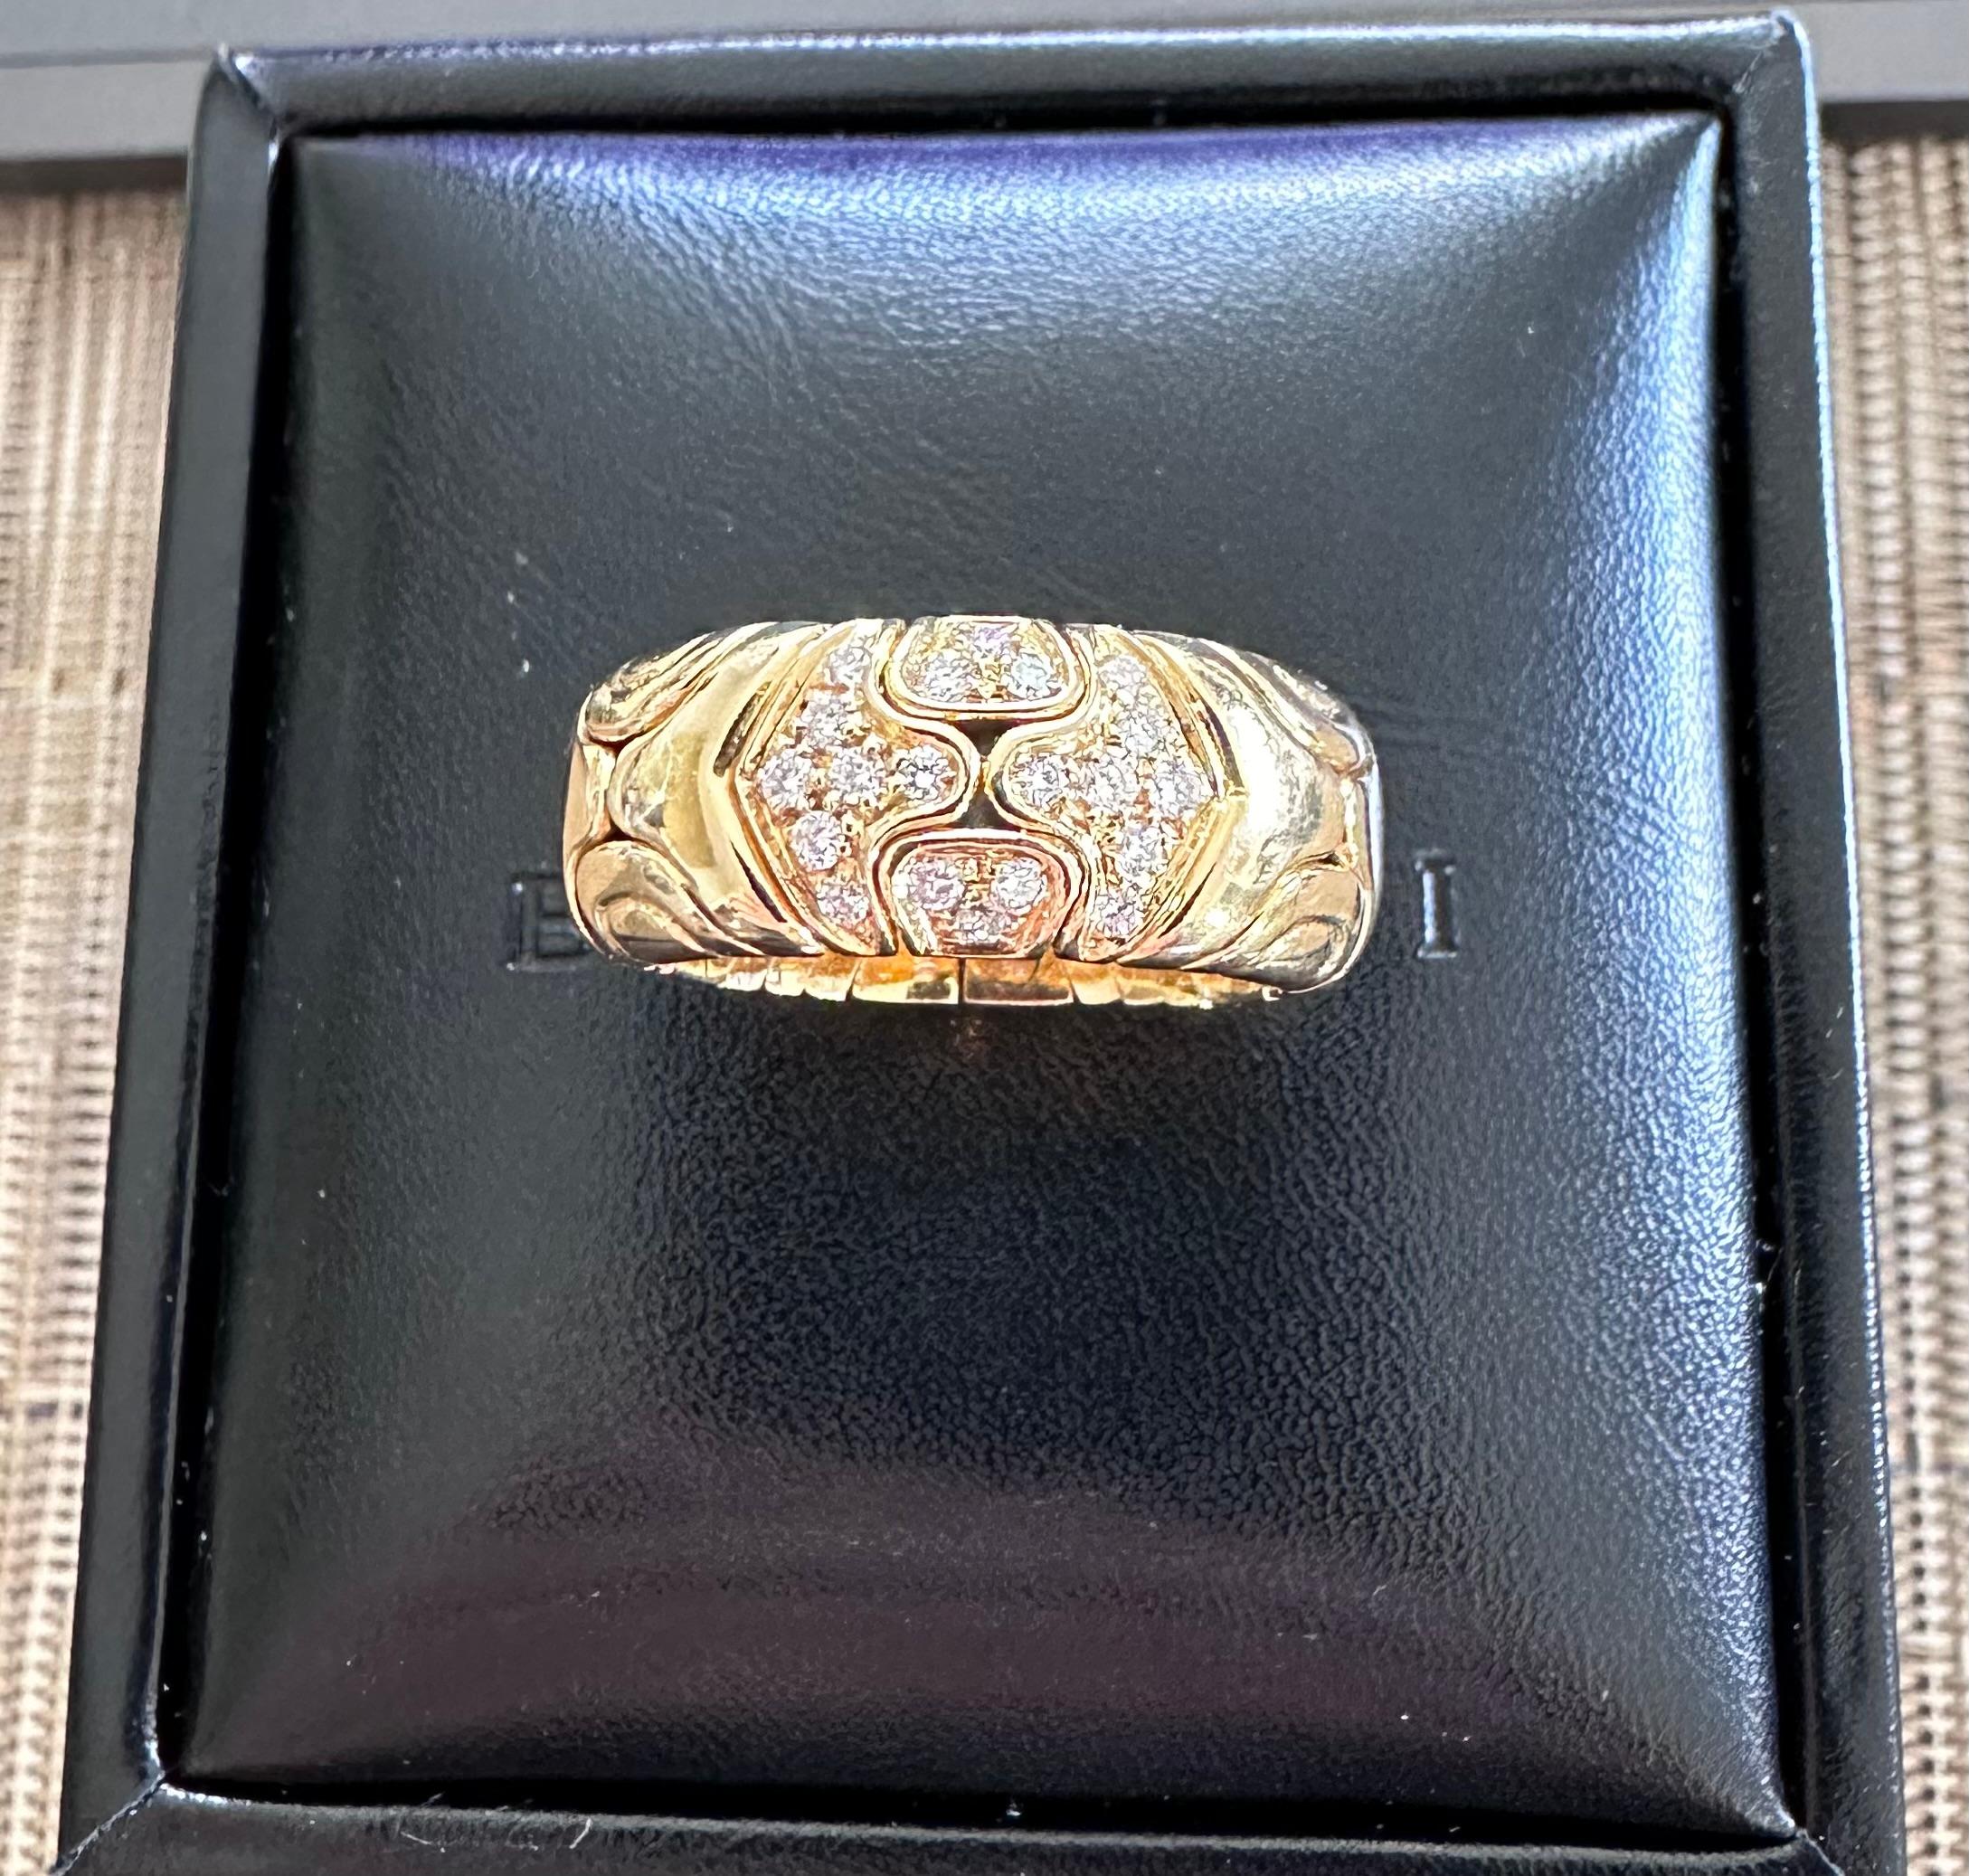 Bvlgari Diamond Band
A geometric flexible Diamond band ring crafted in Rome, Italy by the House of Bulgari.
Solid 18 karat yellow gold featuring 1.00 carat of D- VVS quality diamond dated 1989 total Gram weight of 12.2
Actual size 6.5 although